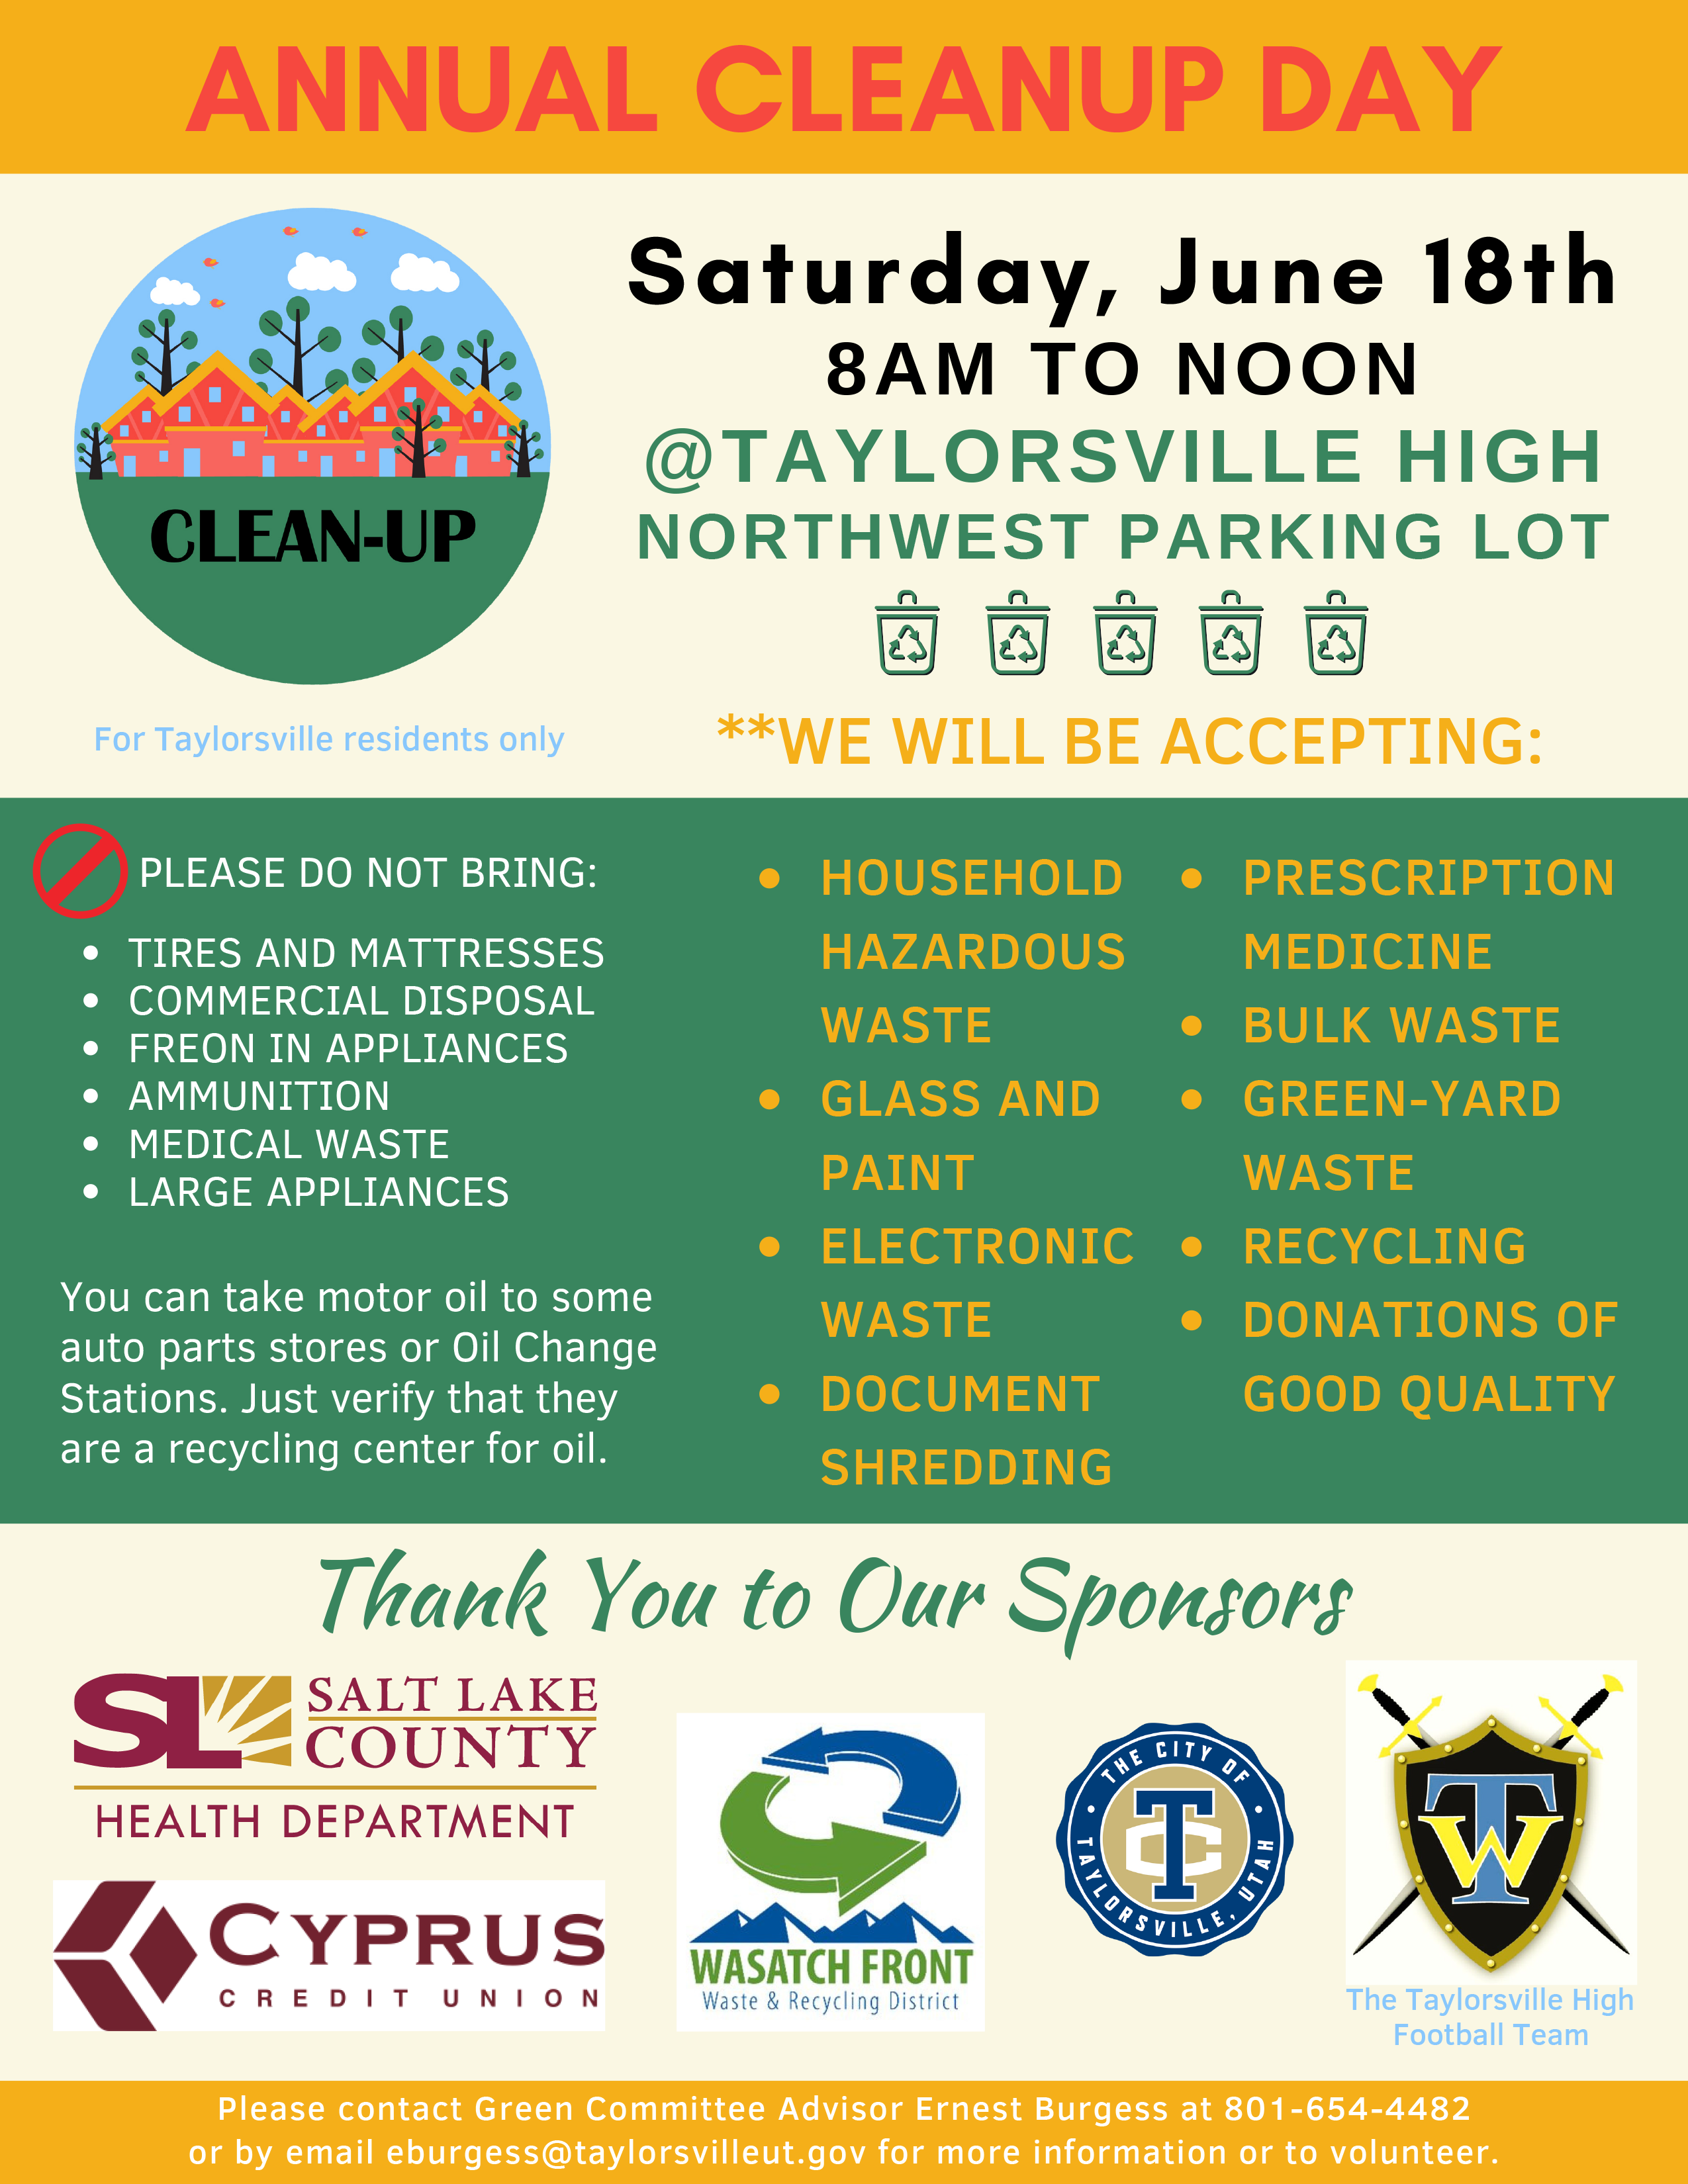 Image for Taylorsville Annual Cleanup Day